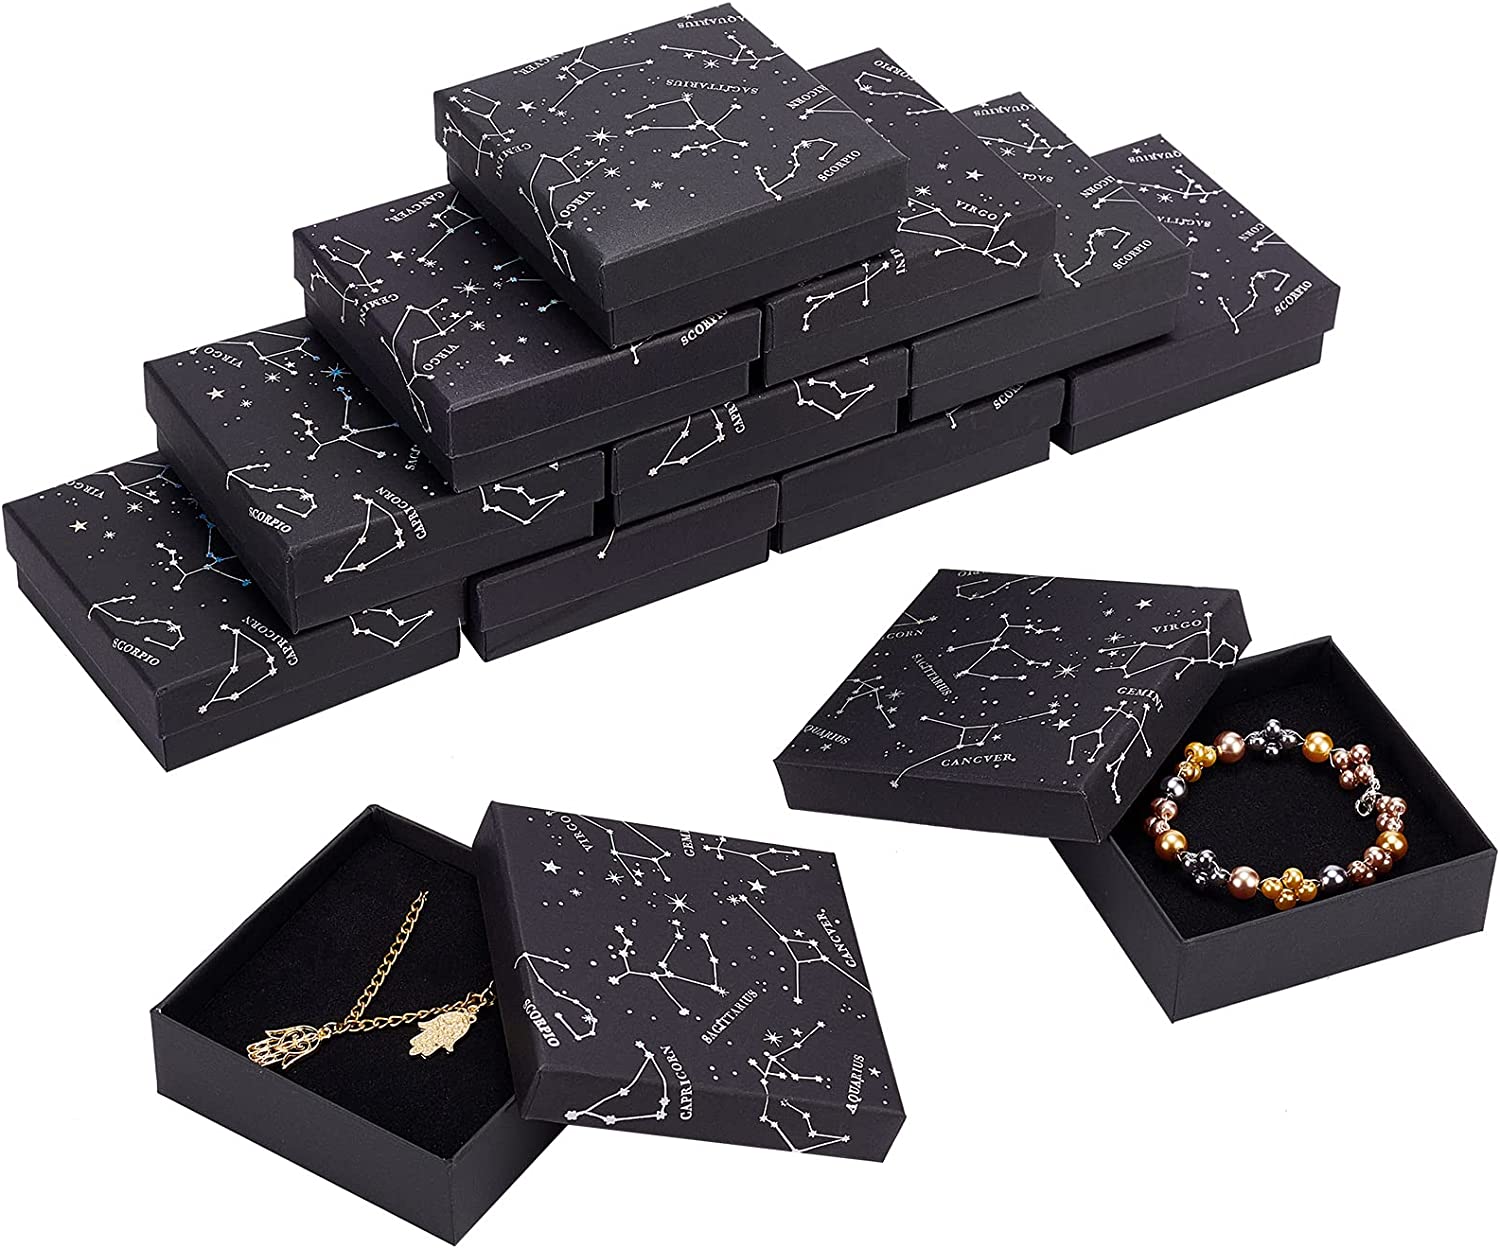 Superfindings 12pcs Cardboard Jewelry Boxes 93x93cm Black Hot Stamping Jewelry Cardboard Boxes